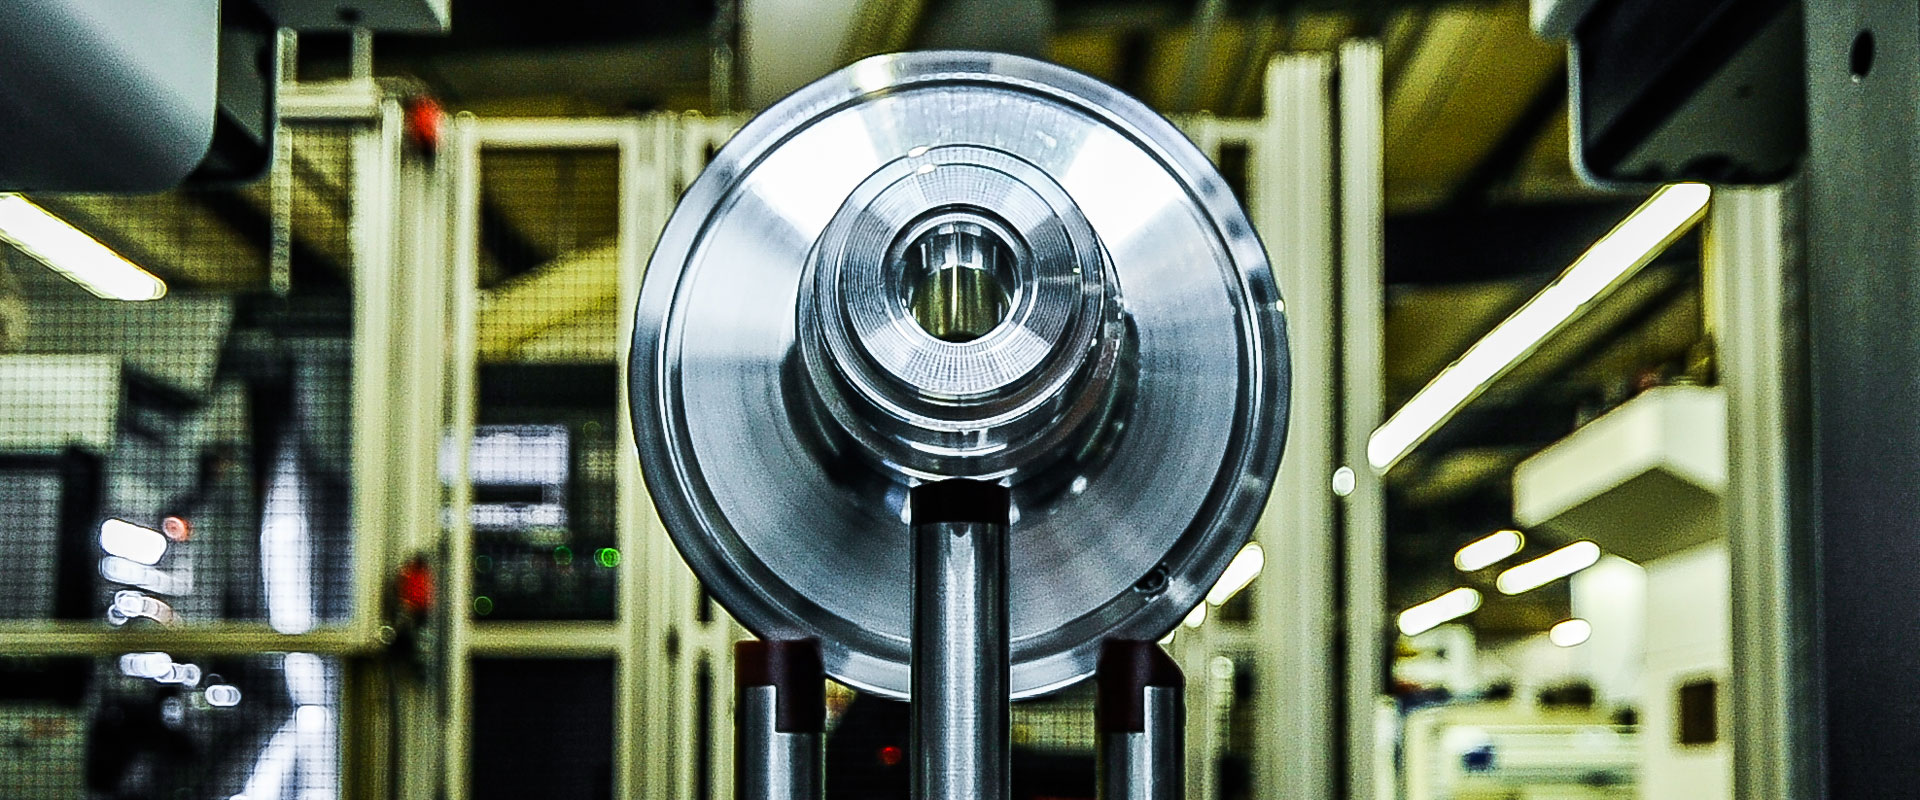 One of Northeast Tool's precisely manufactured metals